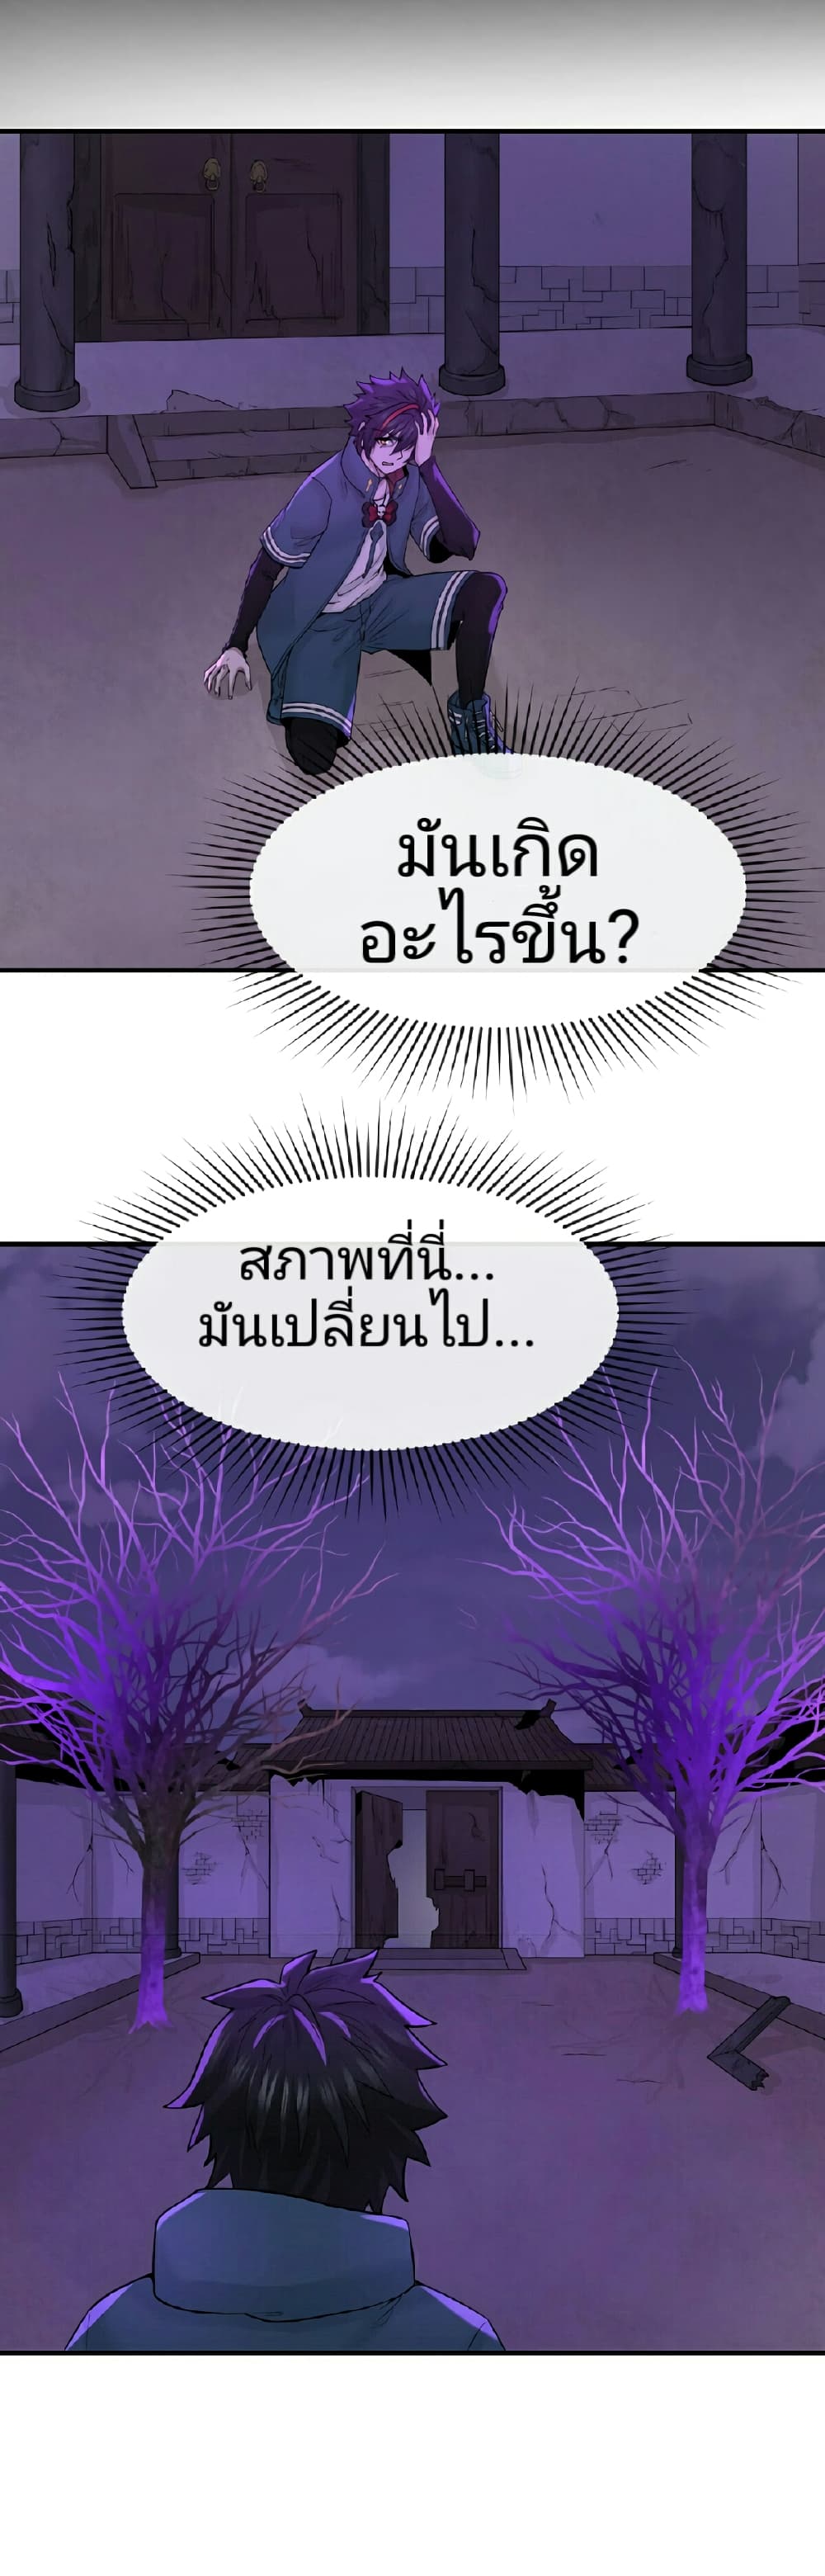 The Age of Ghost Spirits à¸à¸­à¸à¸à¸µà¹ 48 (3)